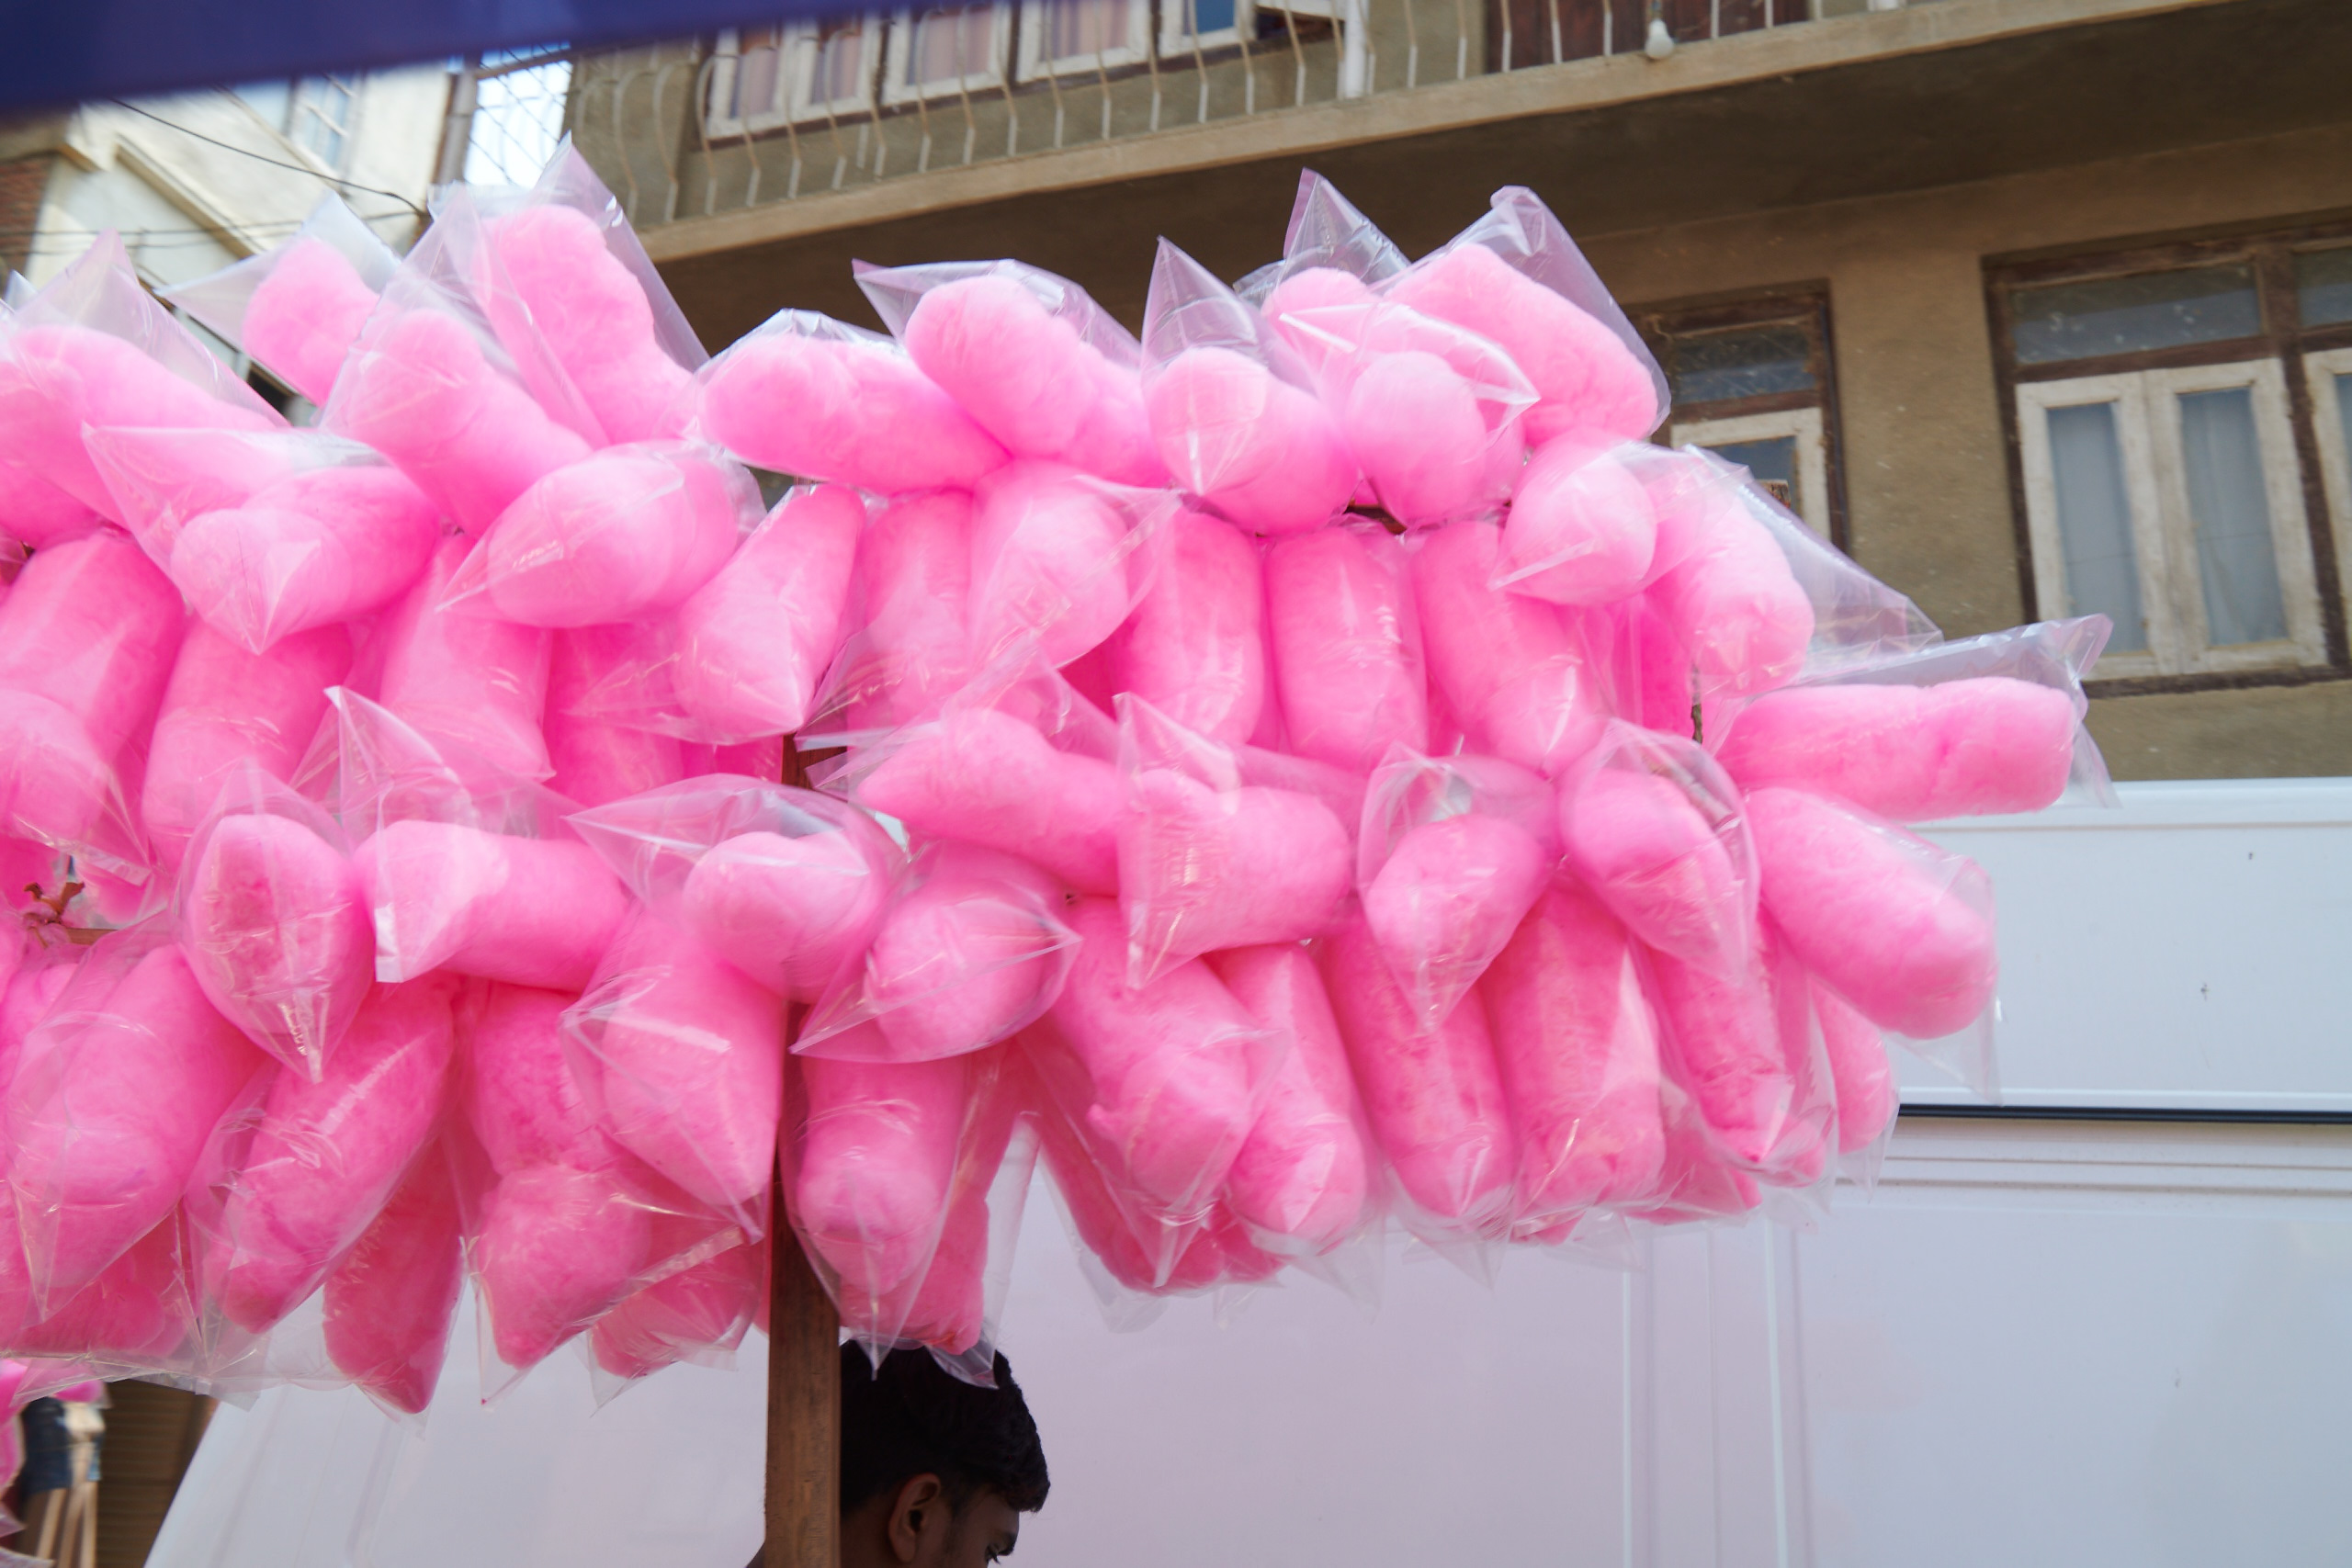 Food department urges not to consume cotton candy as it contains ‘Rhodamine B’